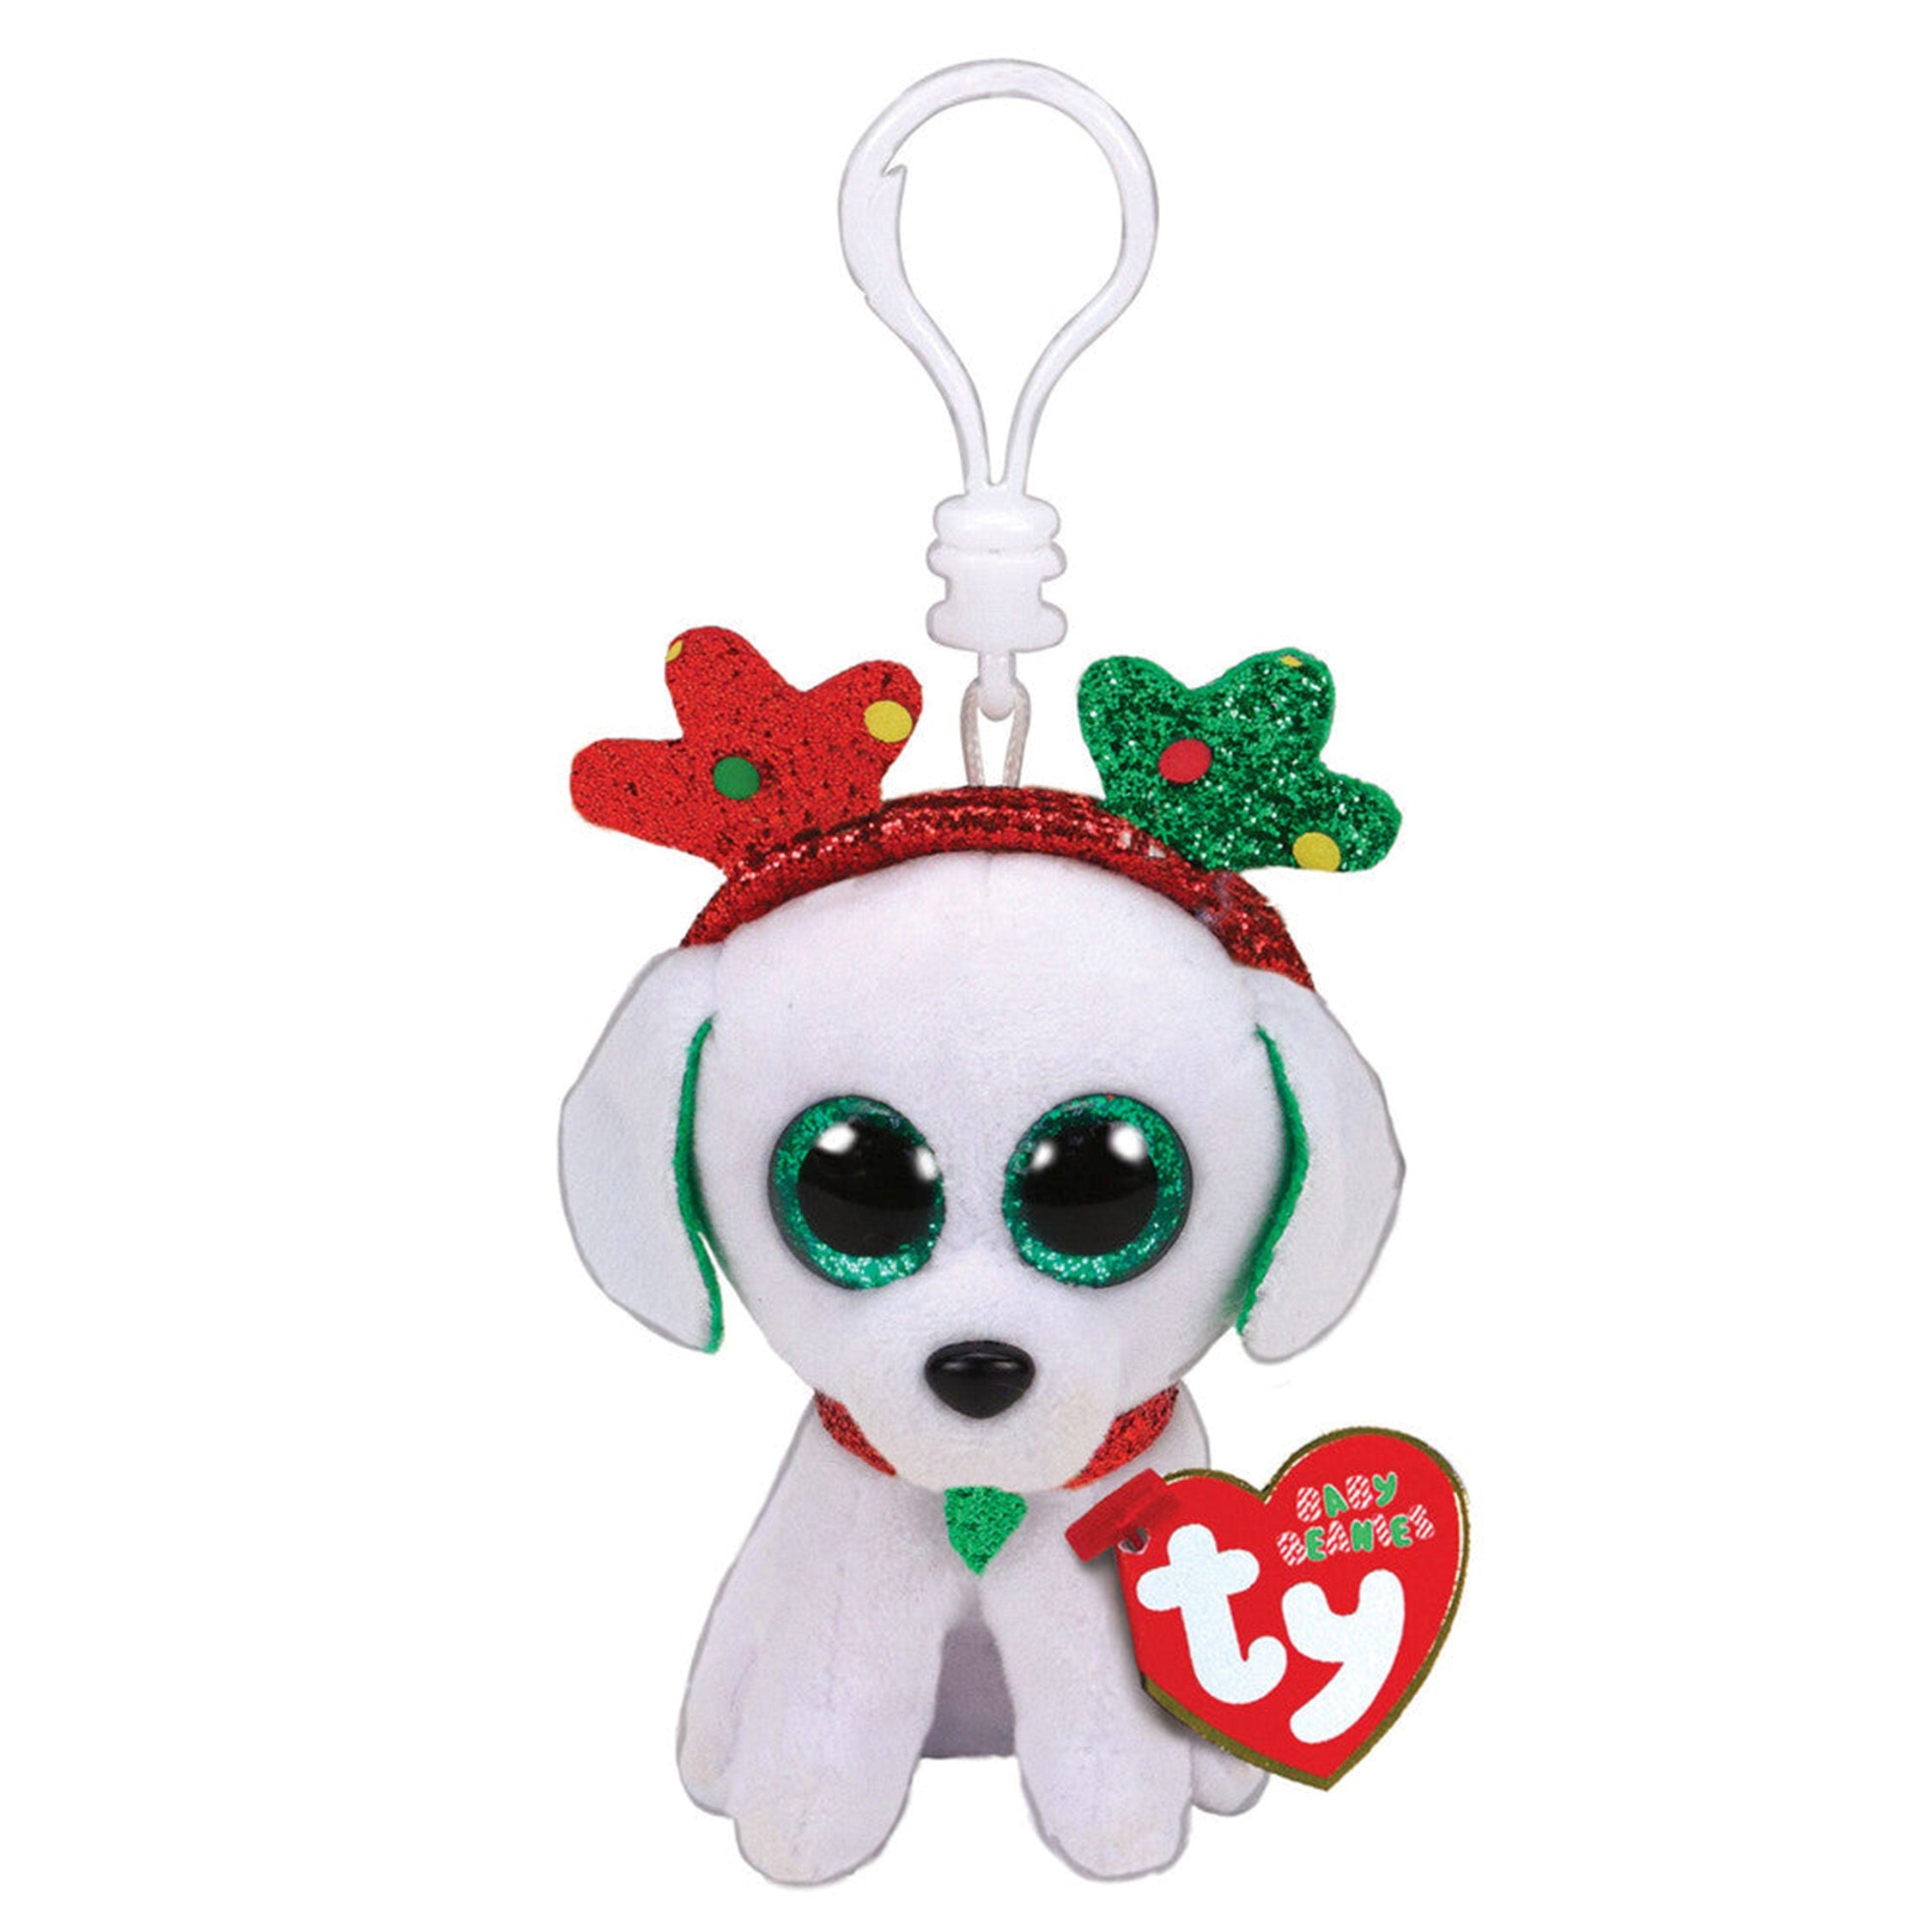 Beanie Boos Holiday Collection - Sugar the Dog (retired)